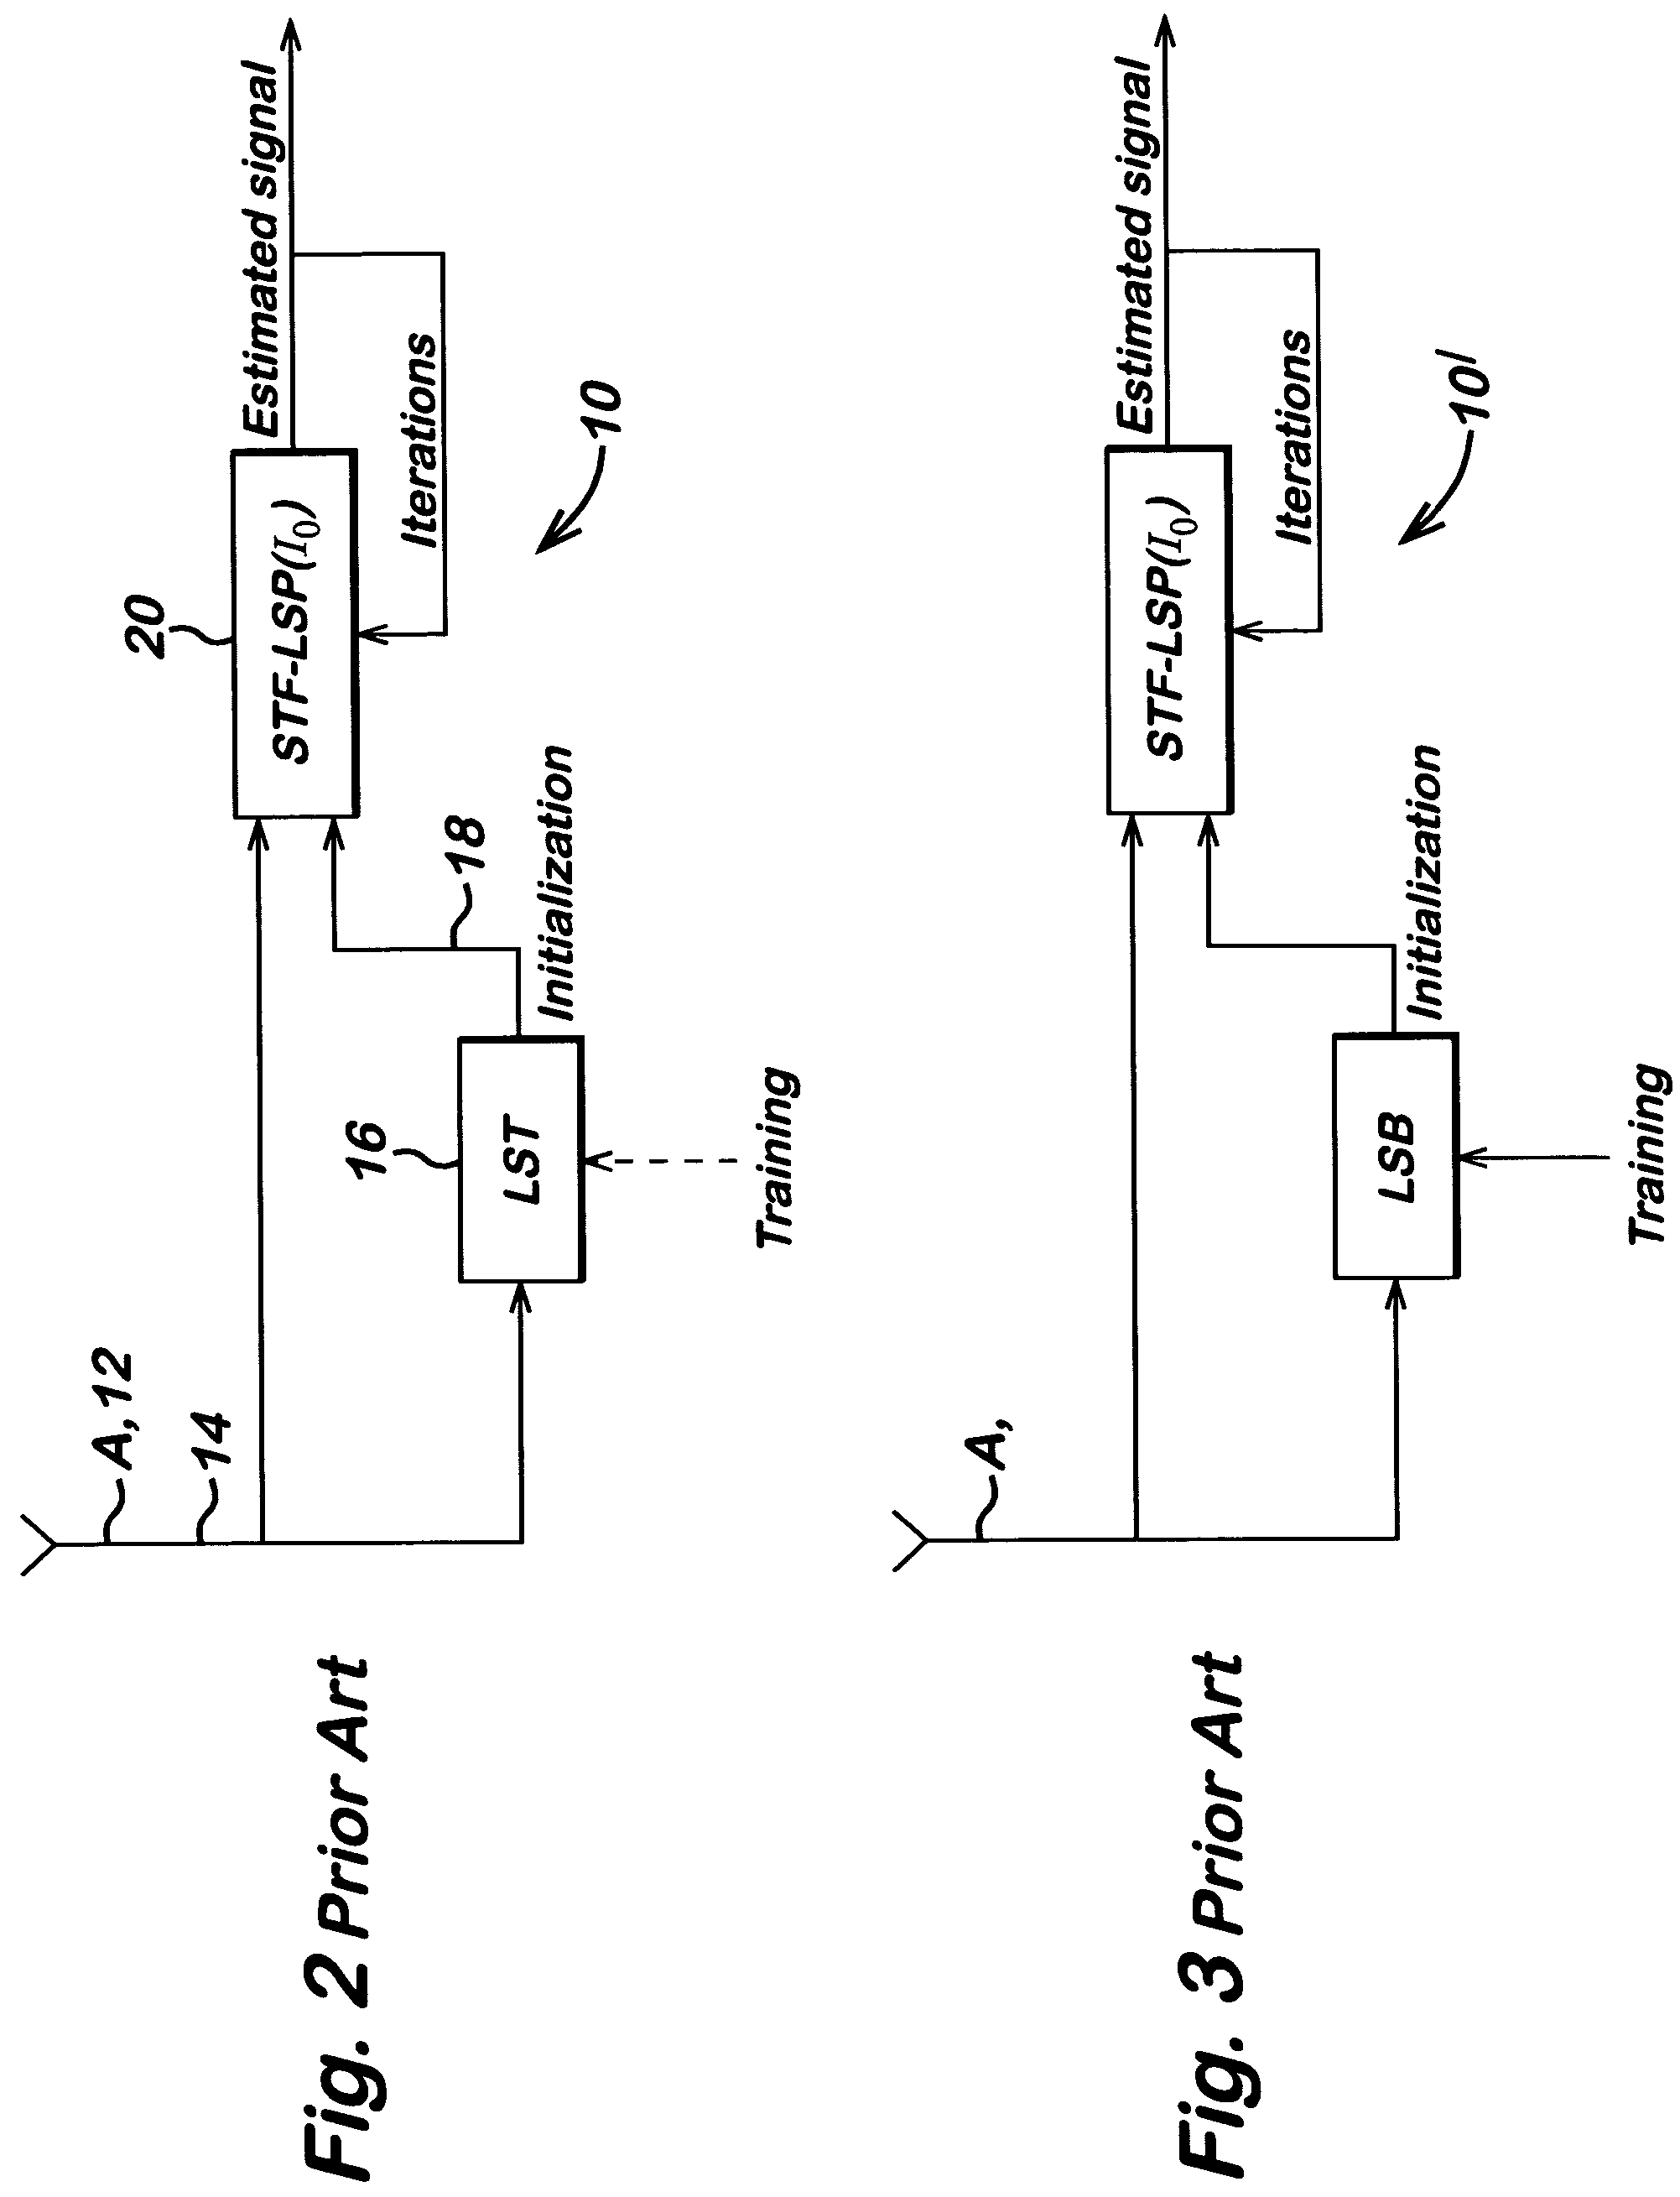 Receiver of digital data bursts comprising an antenna array, and a method of receiving